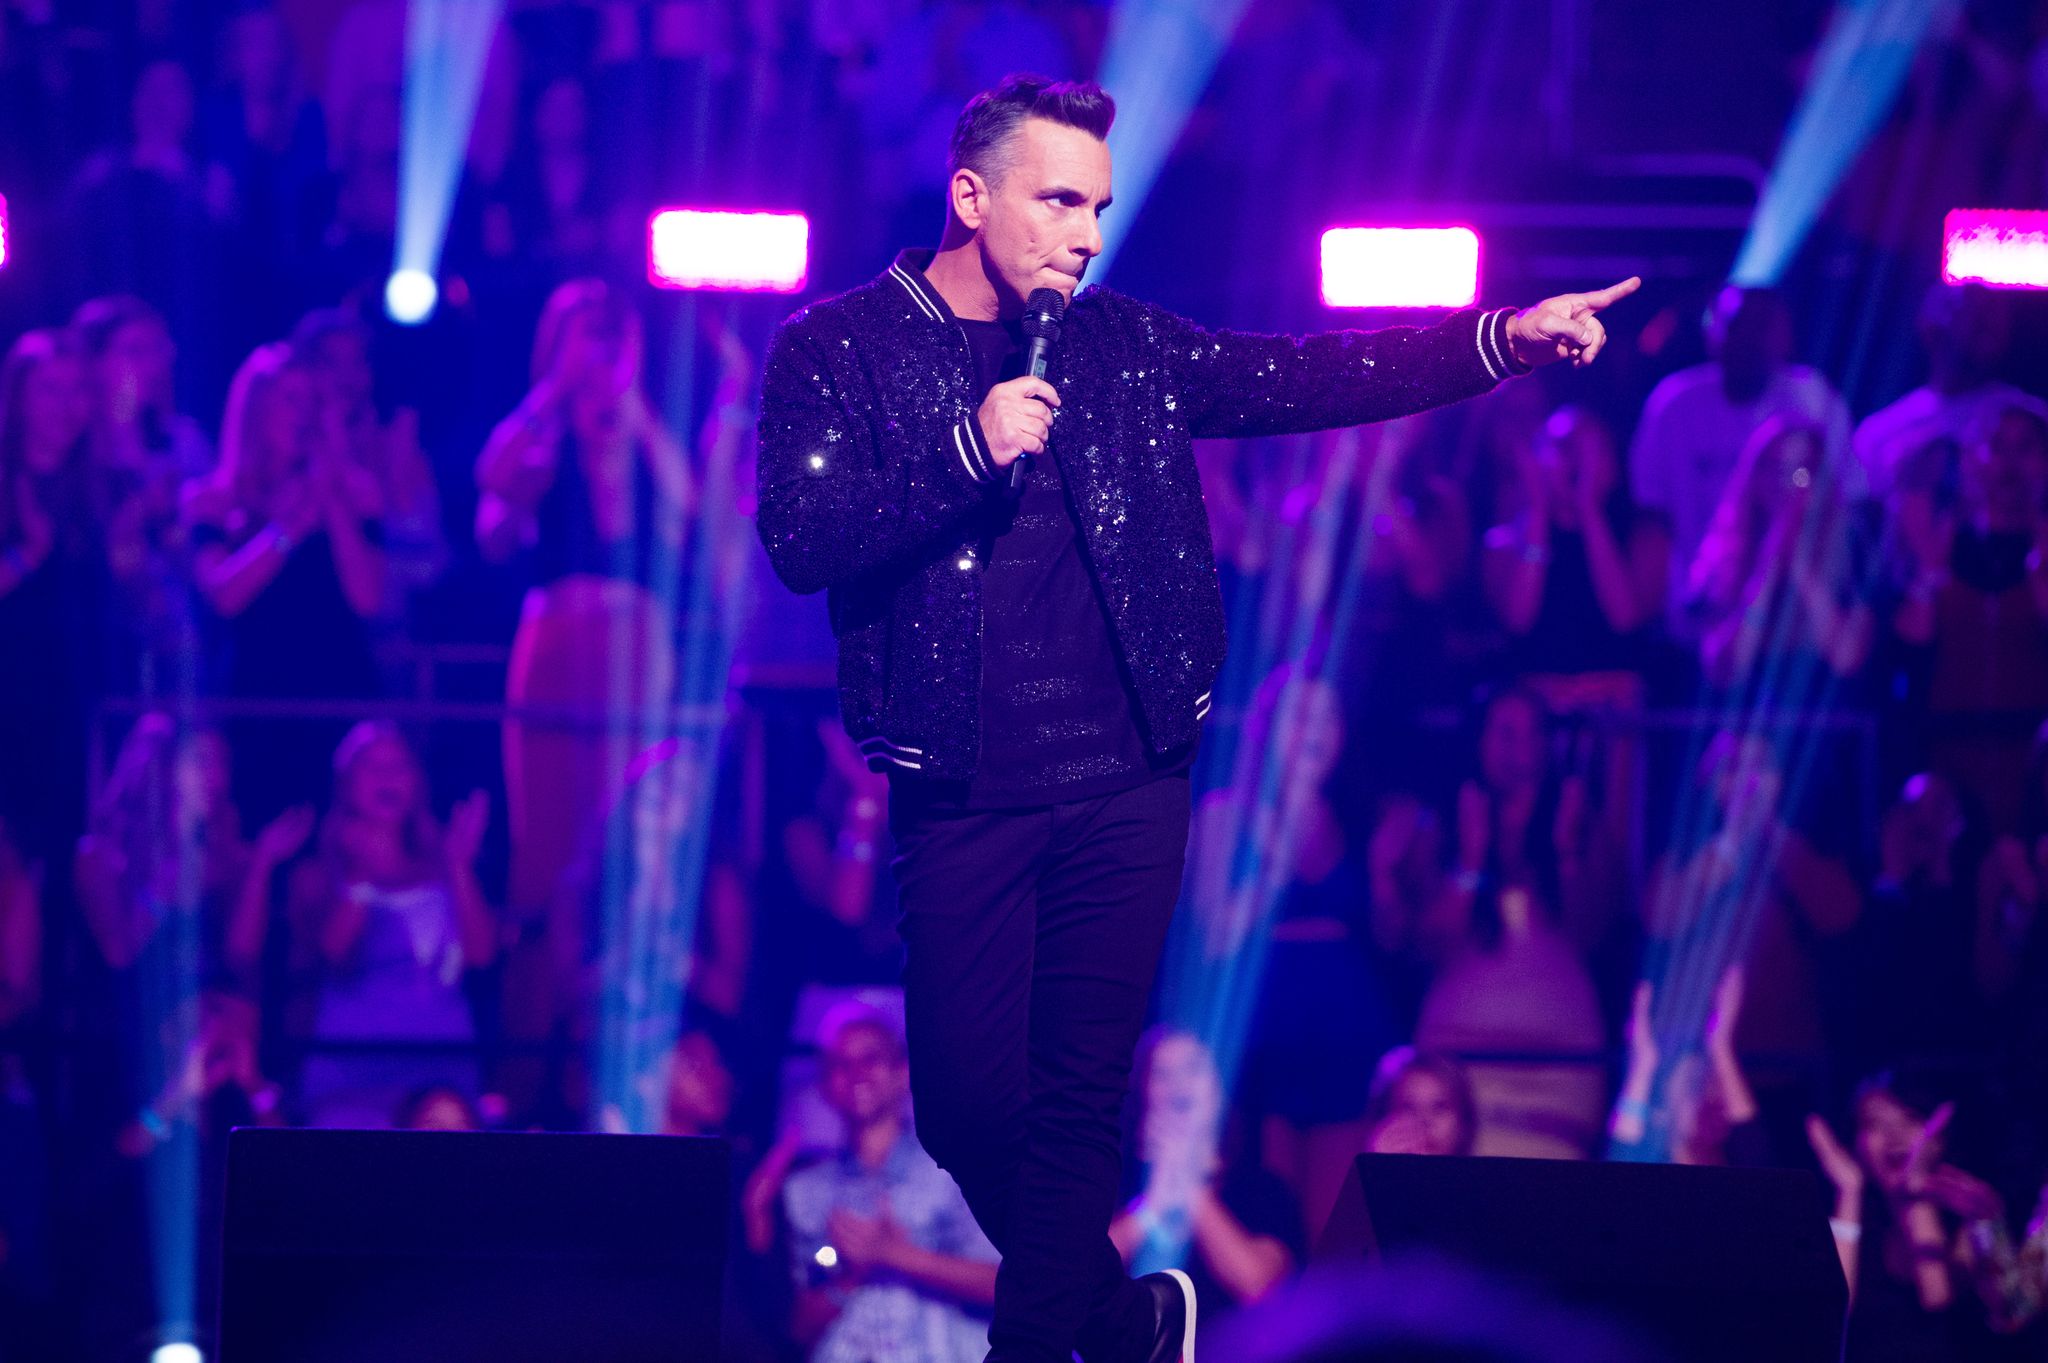  Sebastian Maniscalco at the 2019 MTV Video Music Awards in 2019 in Newark, New Jersey | Source: Getty Images